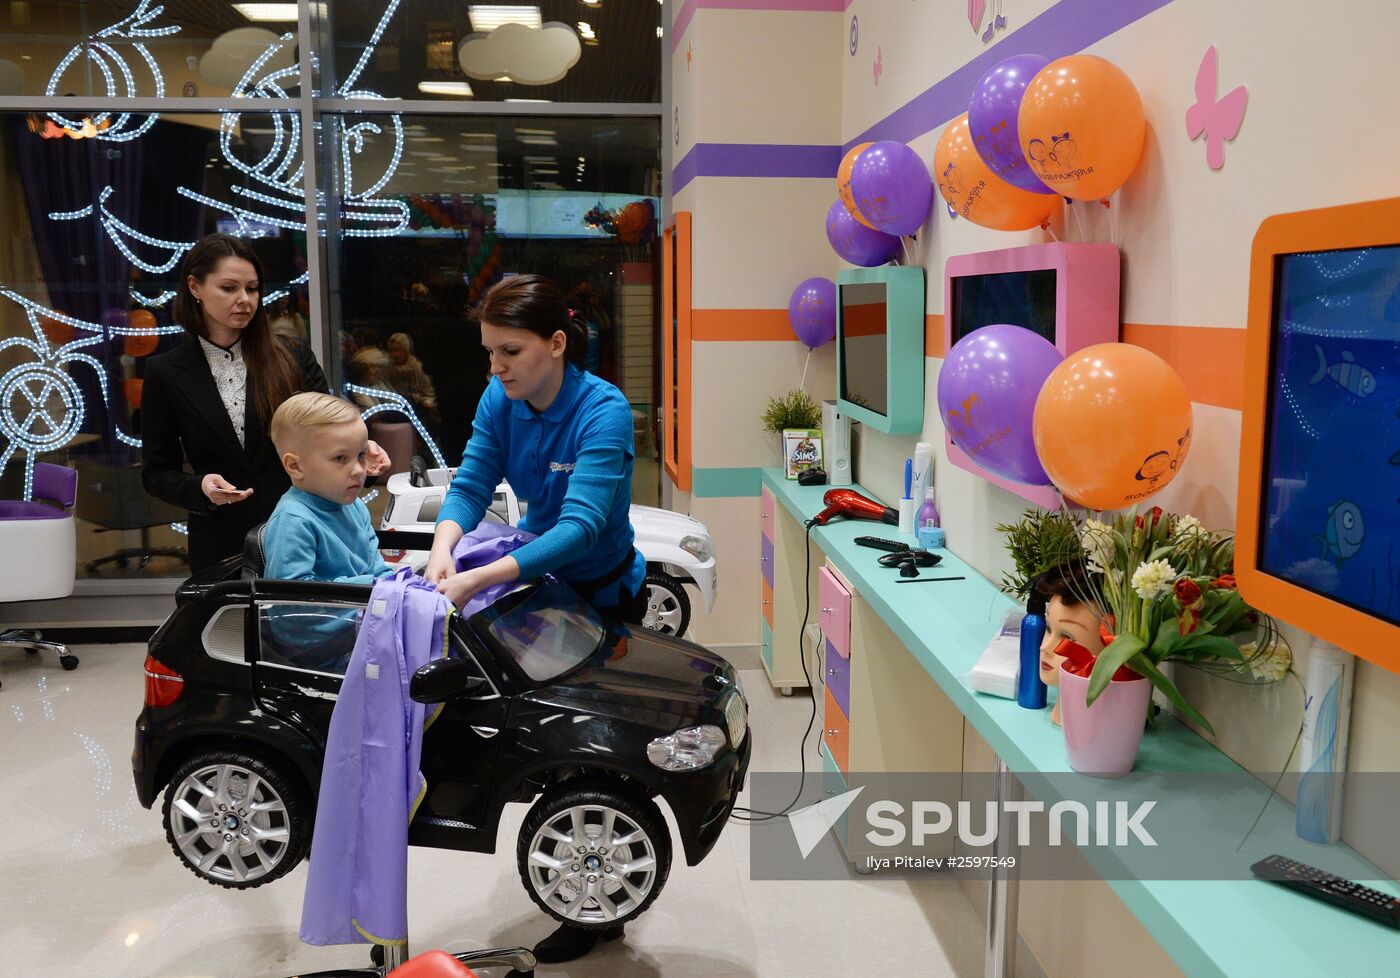 Central Children's Store on Lybyanka opens in Moscow